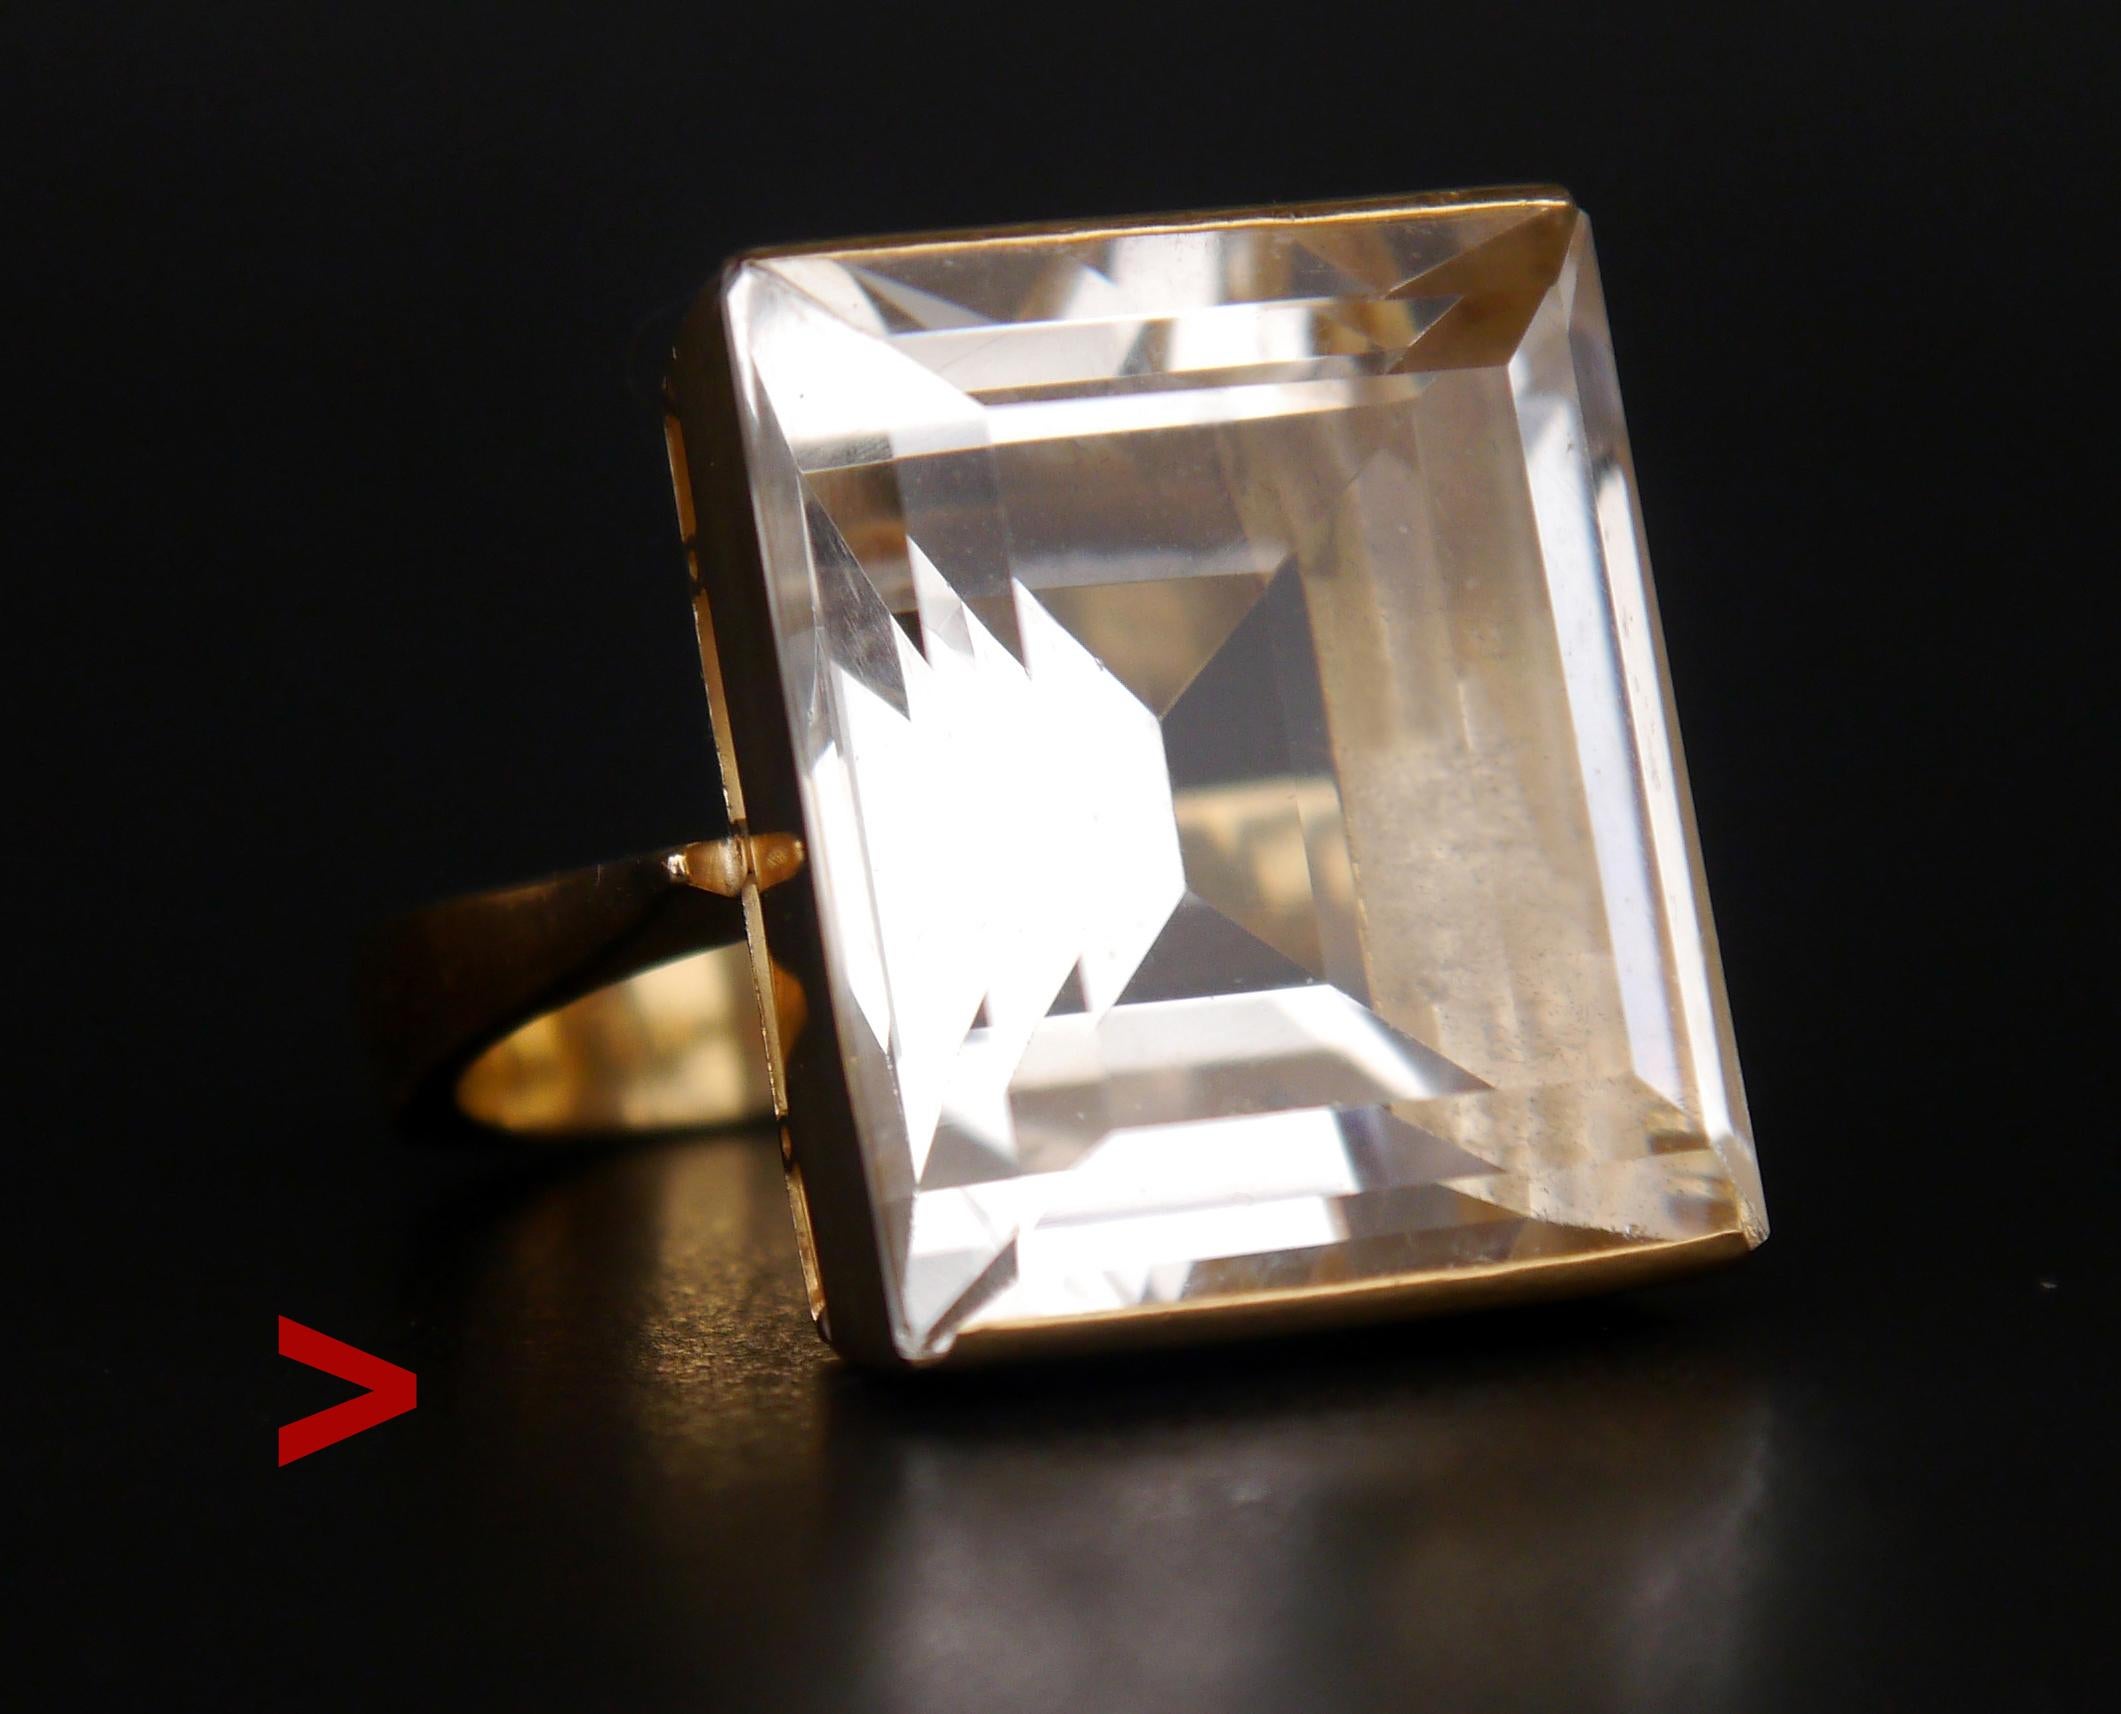 Beautiful ca.1930s - 1950s Swedish Ring featuring huge natural Rock Crystal or colorless Quartz stone.

The band and crown in solid 18ct Yellow Gold + bezel set natural Rock Crystal step cut 20 mm x 17 mm x 10.5 mm deep / ca 30 ct. The stone is of